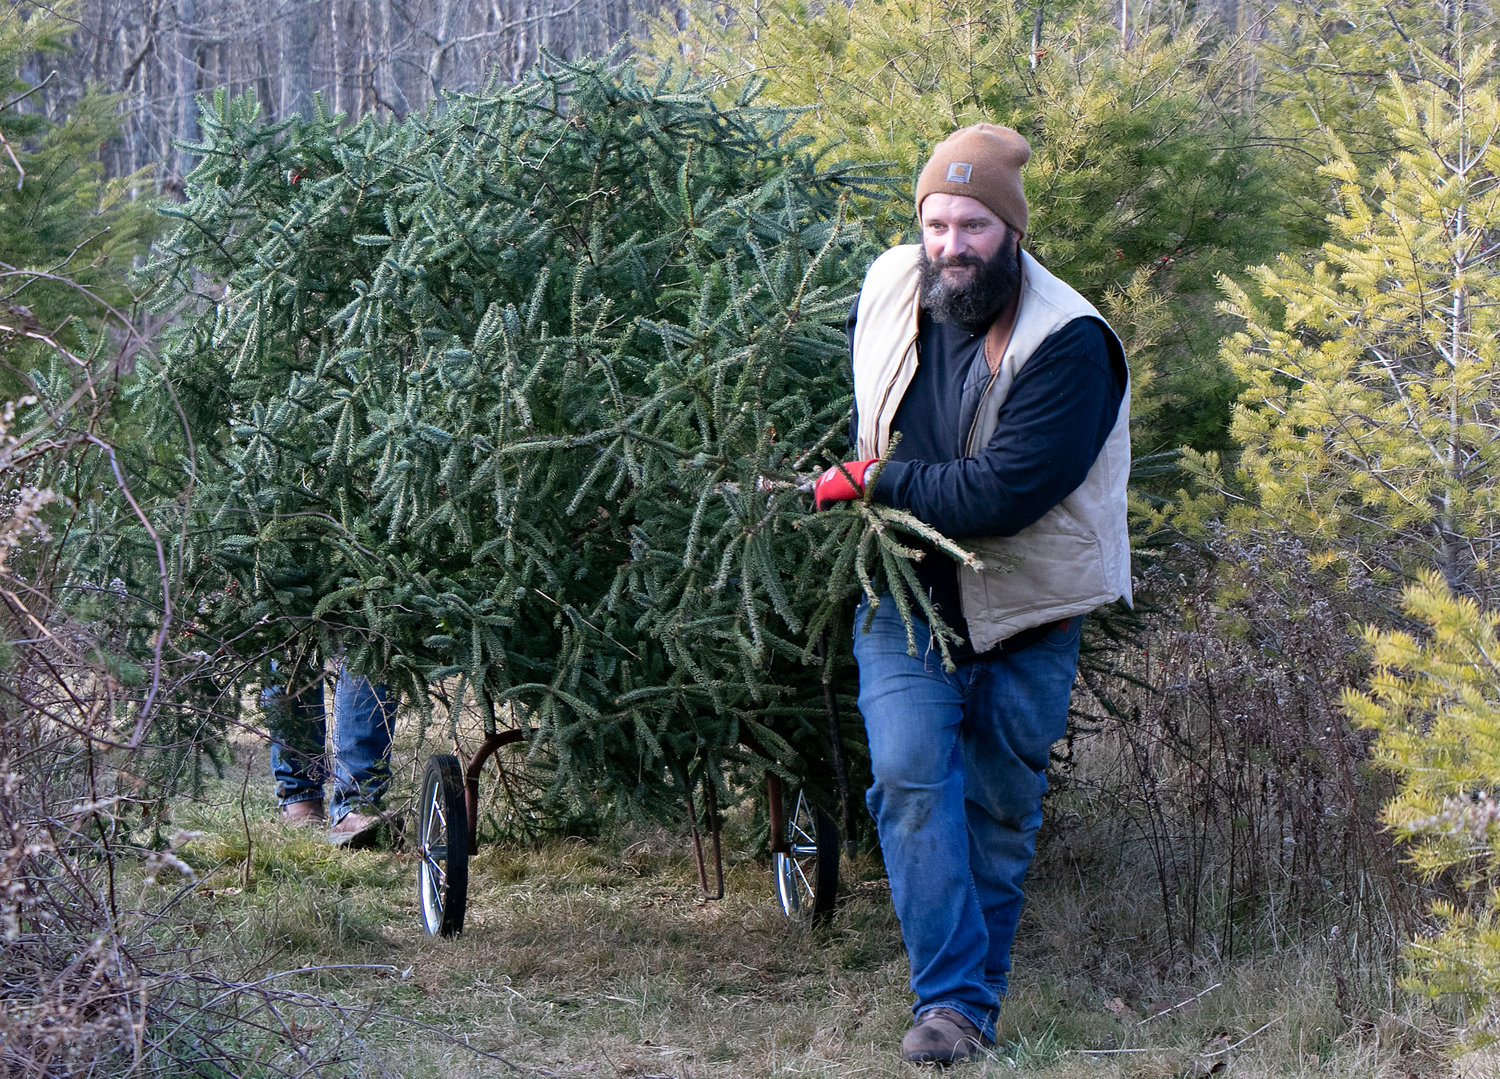 Lou Perry hauls out a Christmas tree from his family's Hidden Spruce Farm this past Sunday. Perry worked the farm as a teenager, and purchased it with his family this past June.